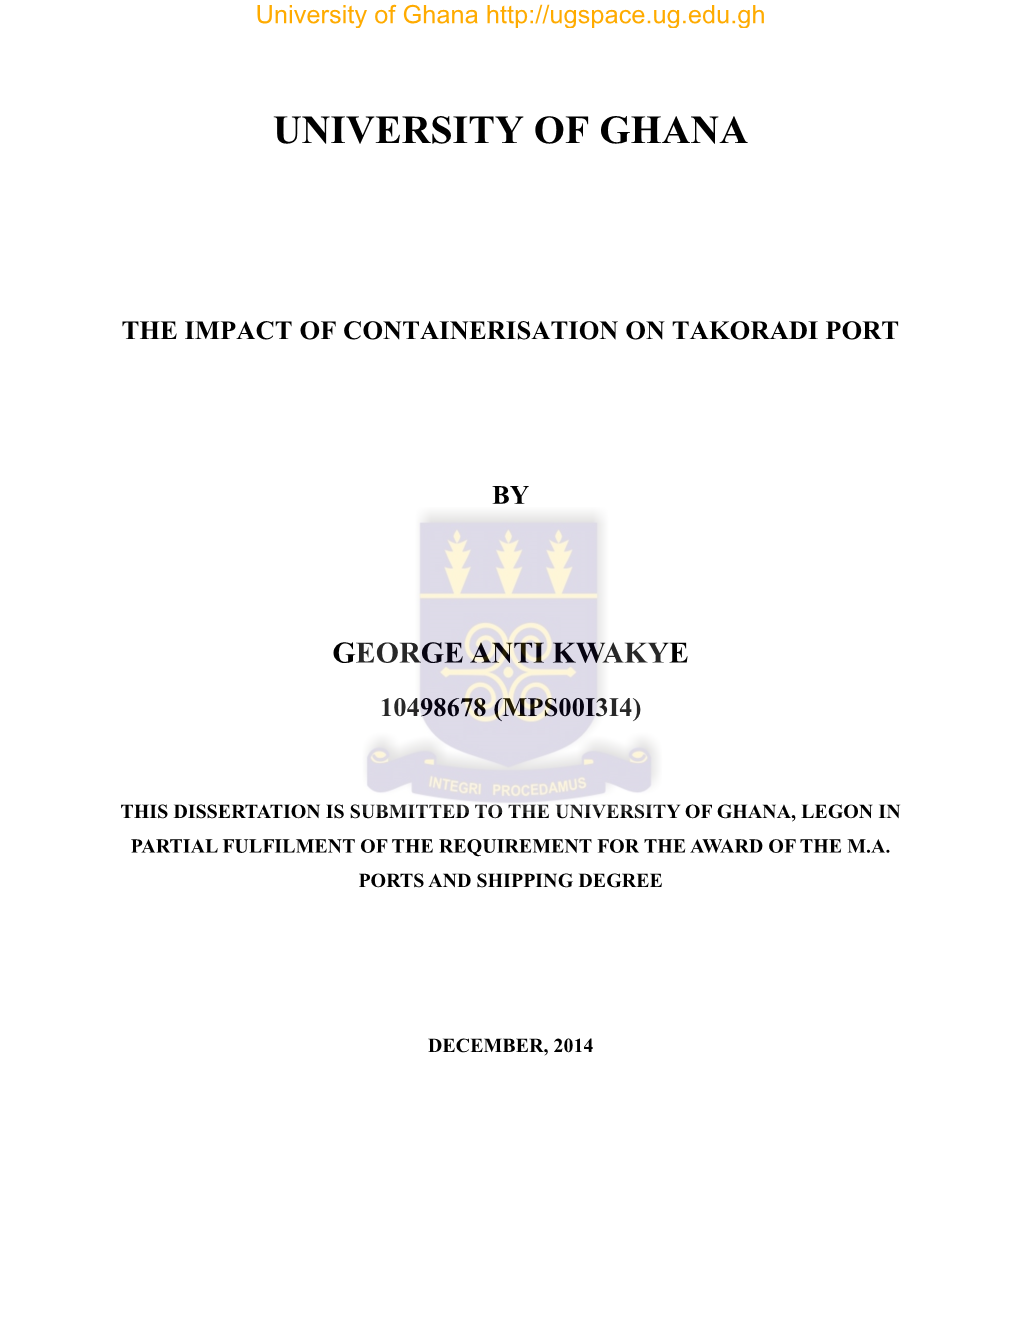 The Impact of Containerisation on Takoradi Port By